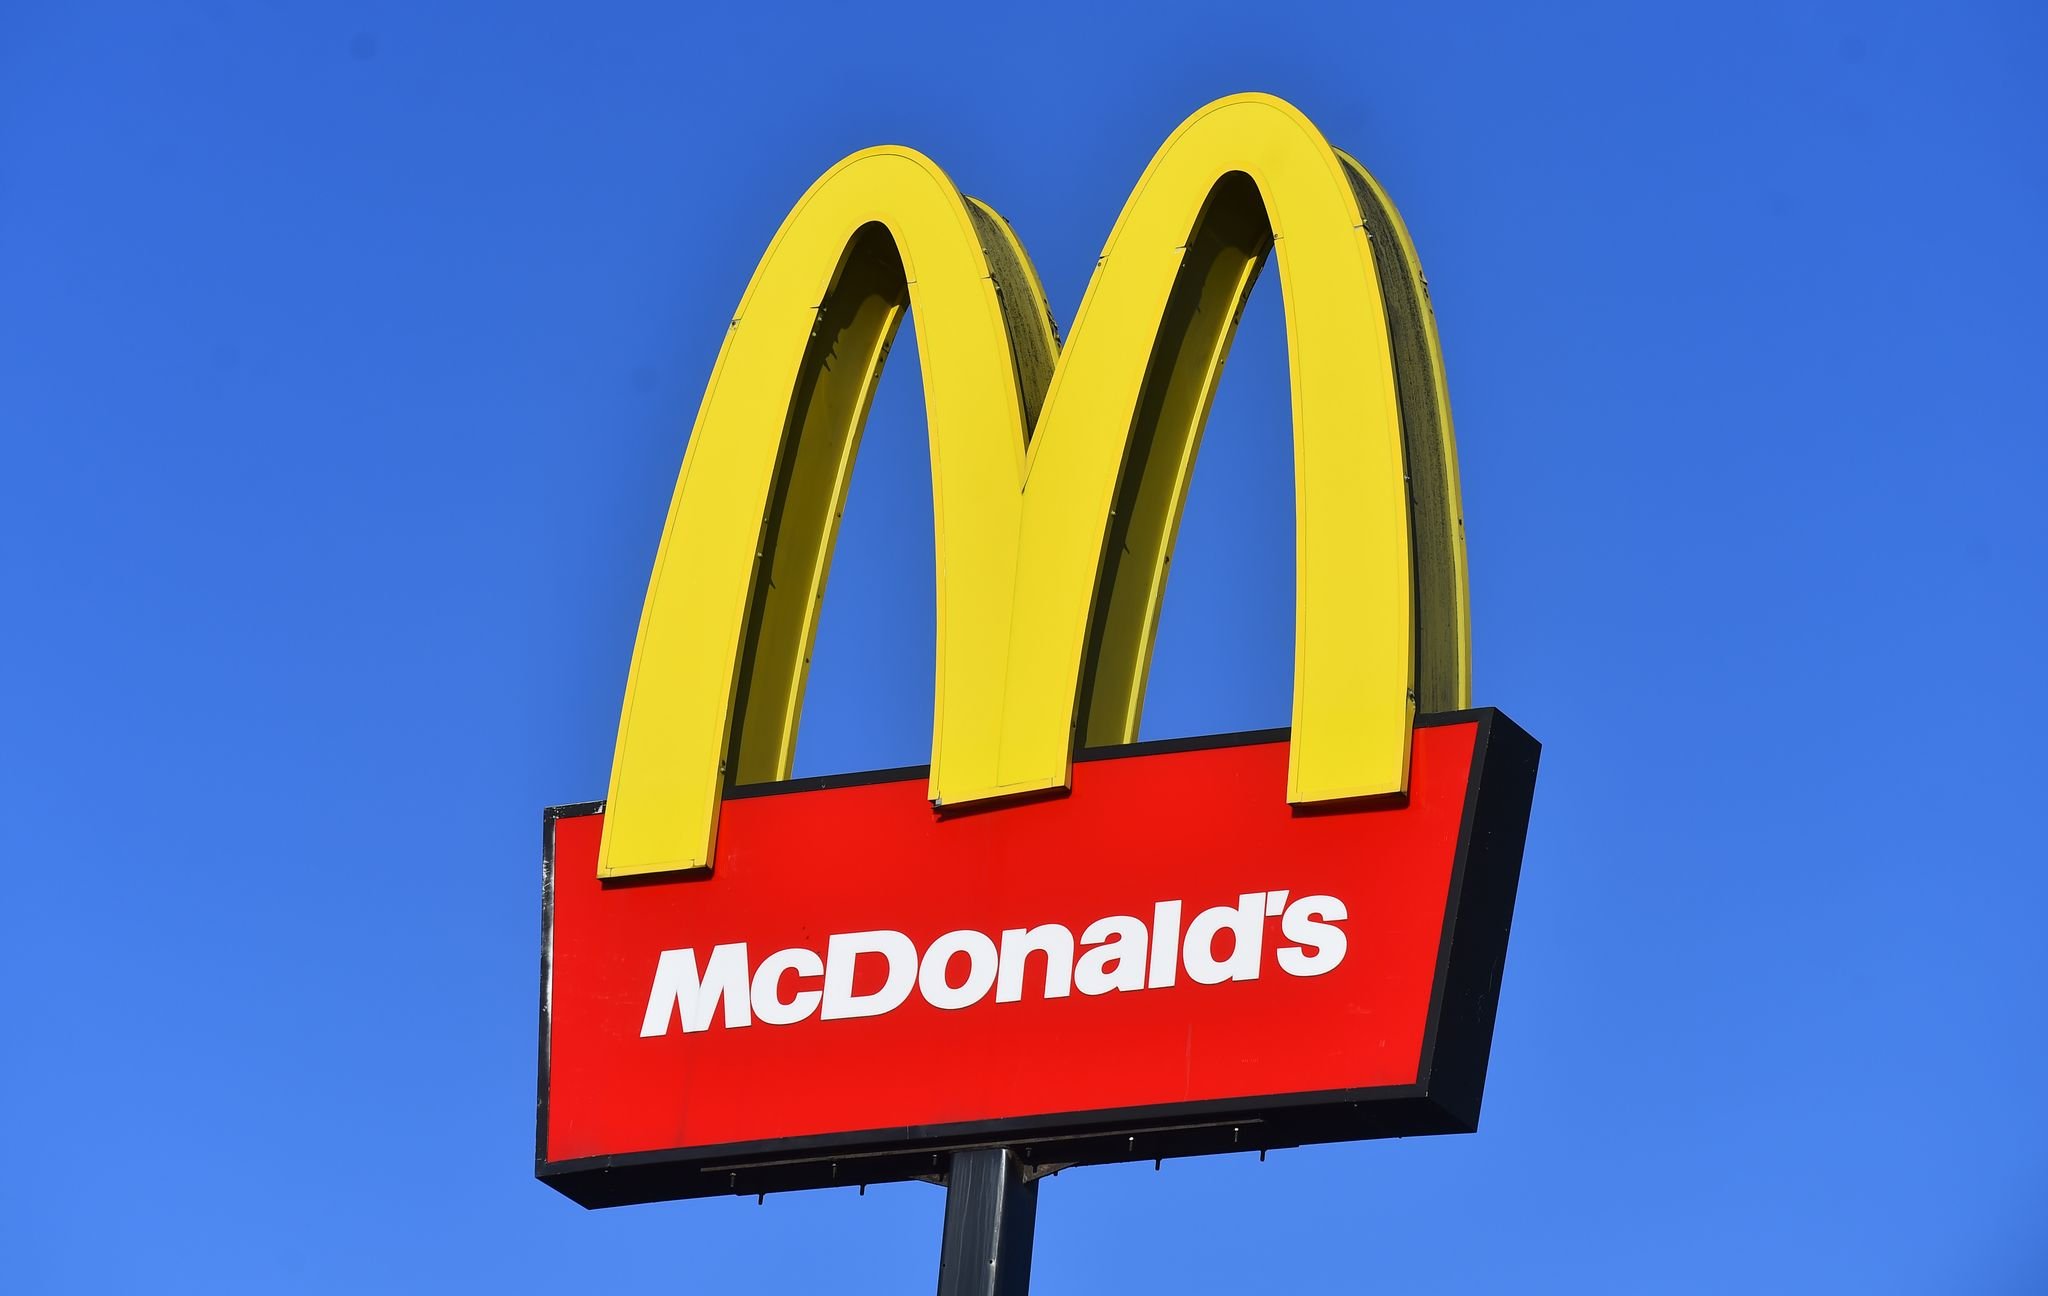 McDonald's trademark sign captured on November 13, 2020 in Staffordshire. | Source: Getty Images